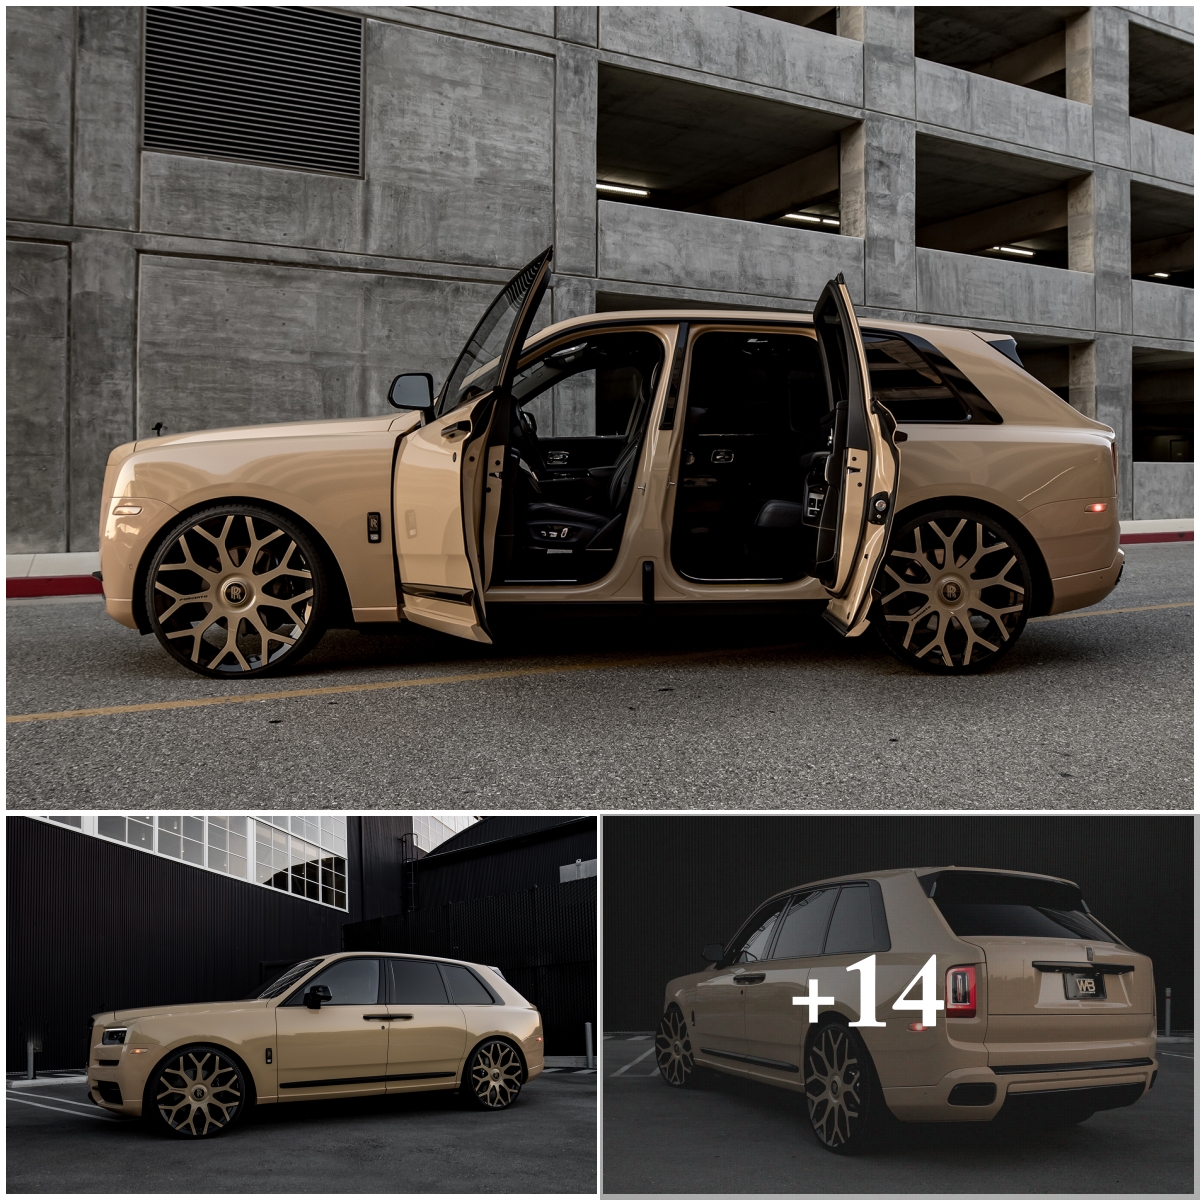 The Exquisite Brown-Toned Customization of the Rolls-Royce Cullinan